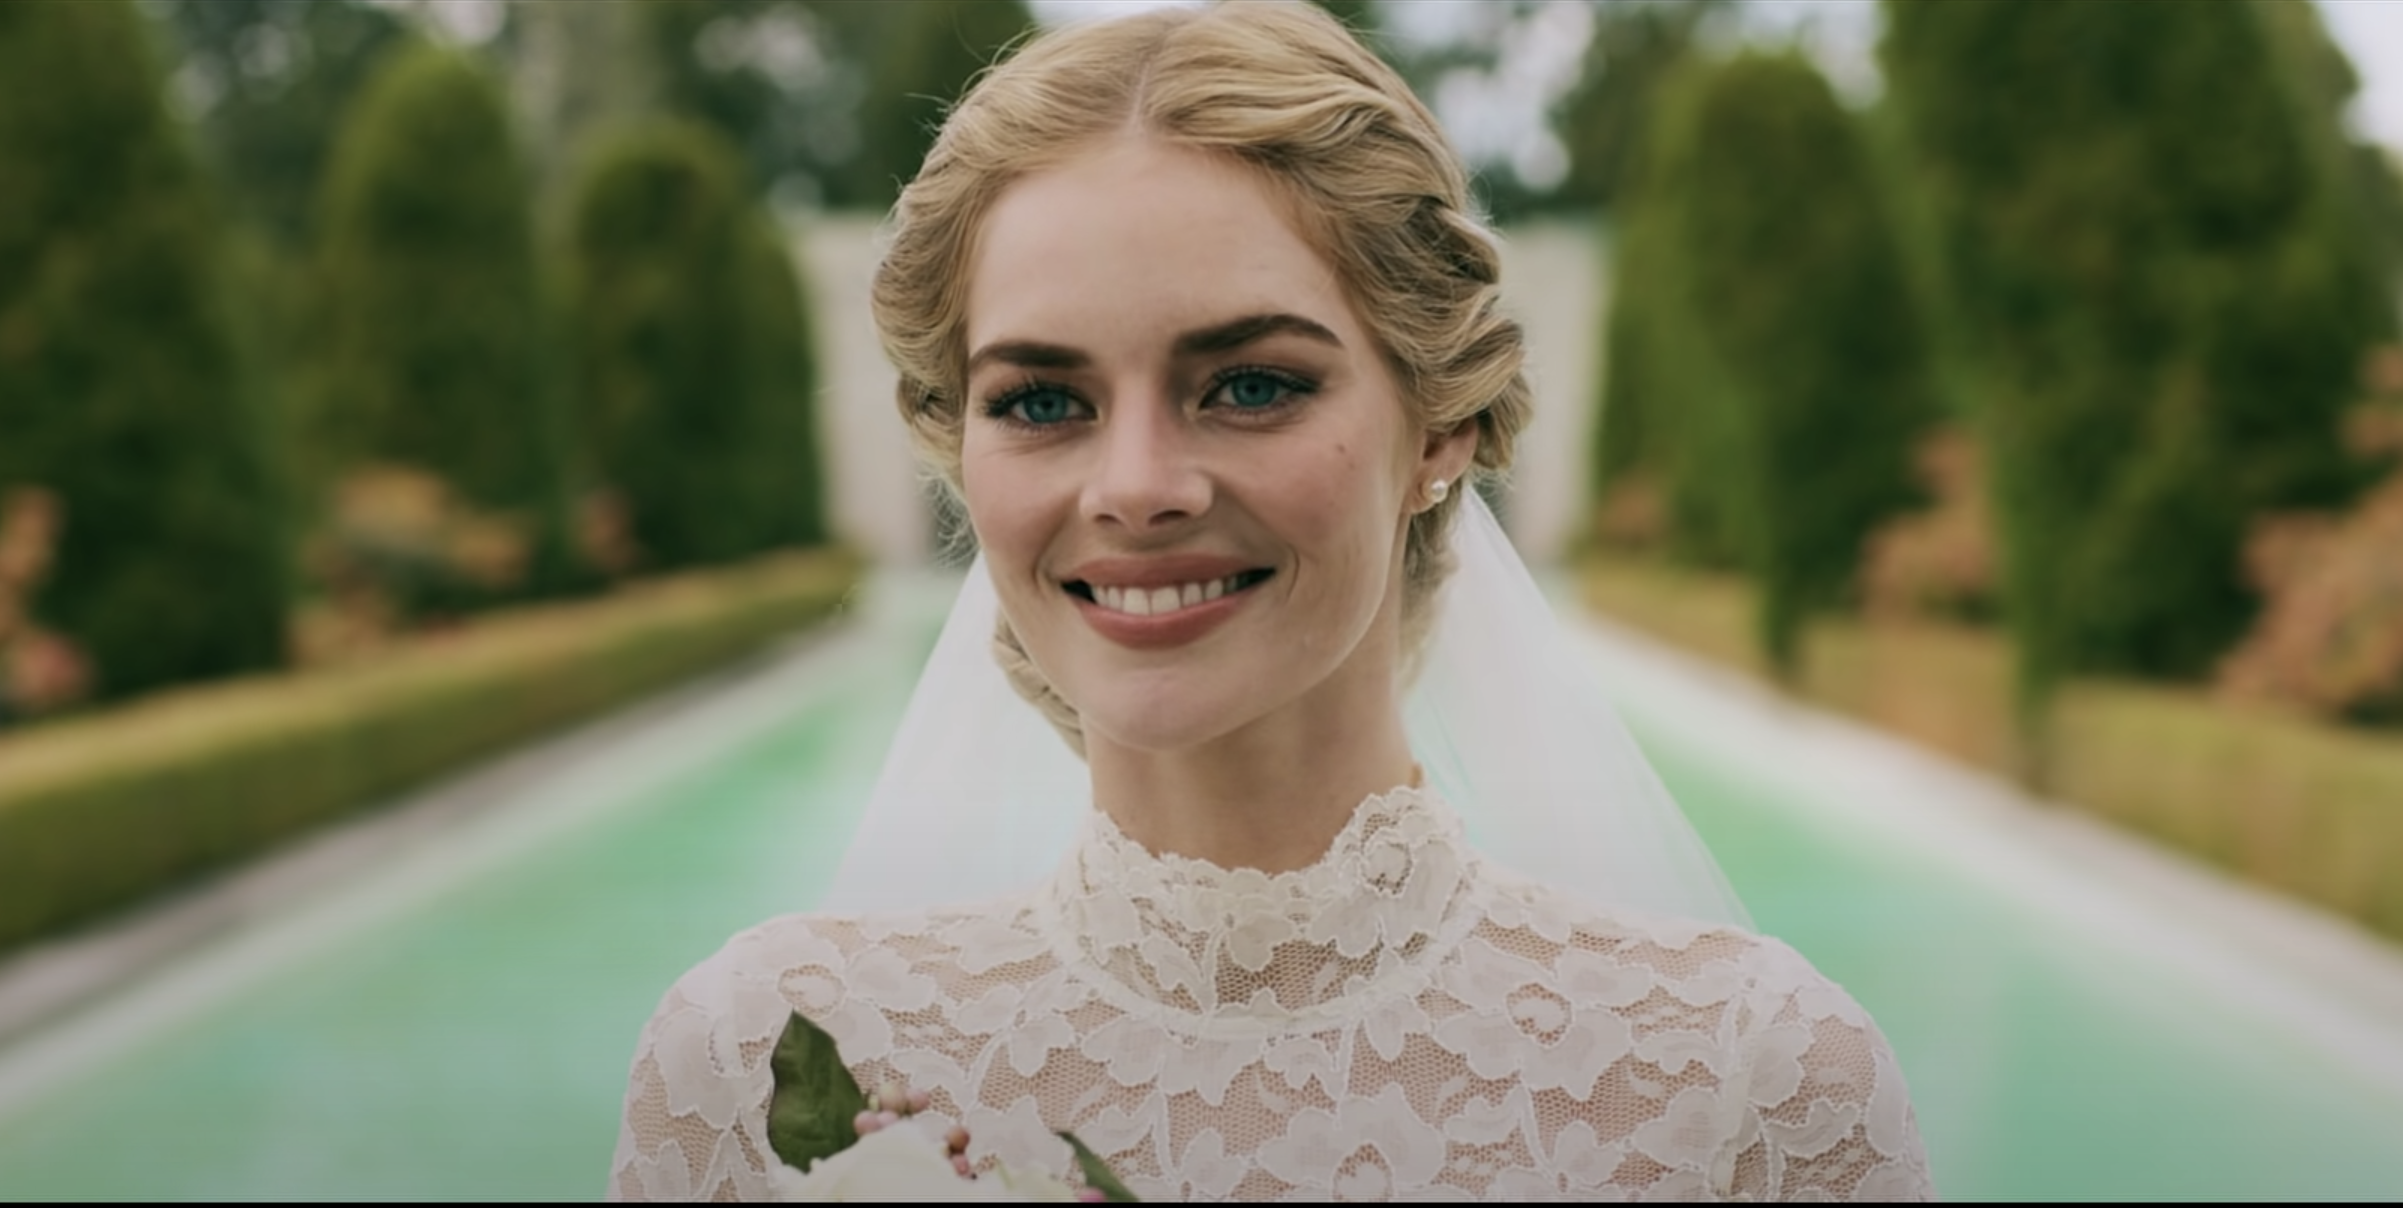 A woman in a wedding dress smiles to someone off-camera